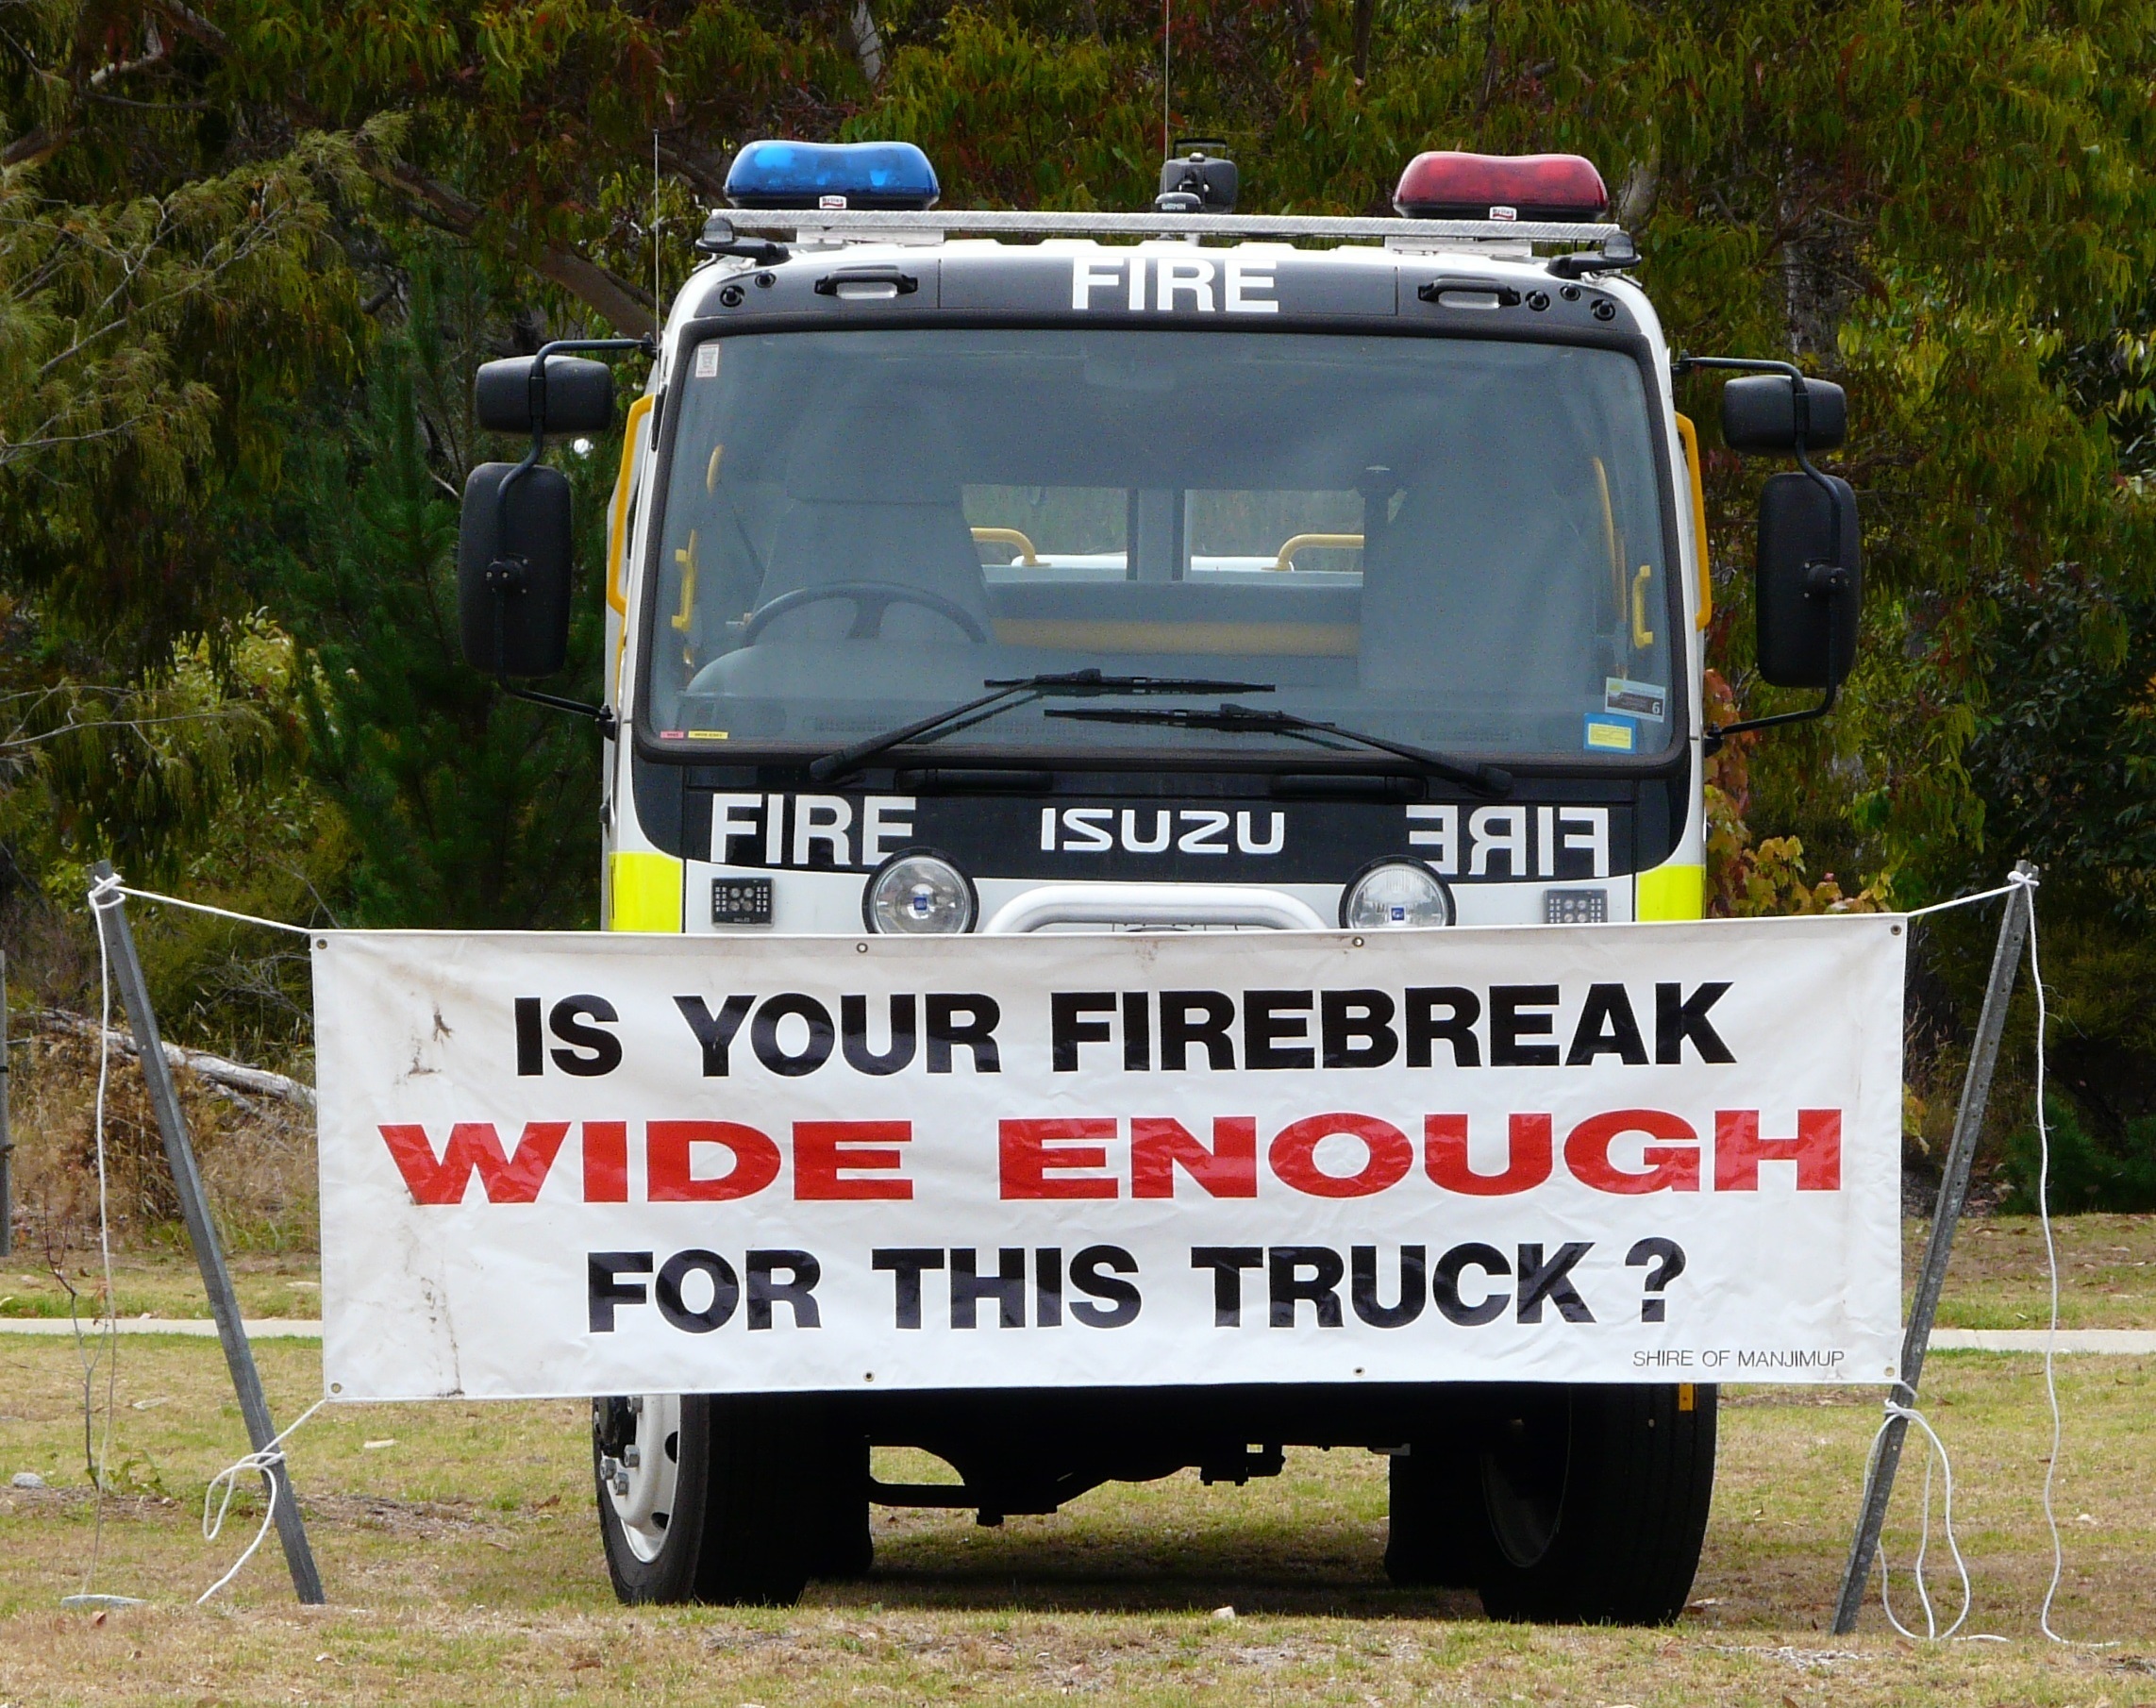 Fire truck with banner showing required width of firebreak.